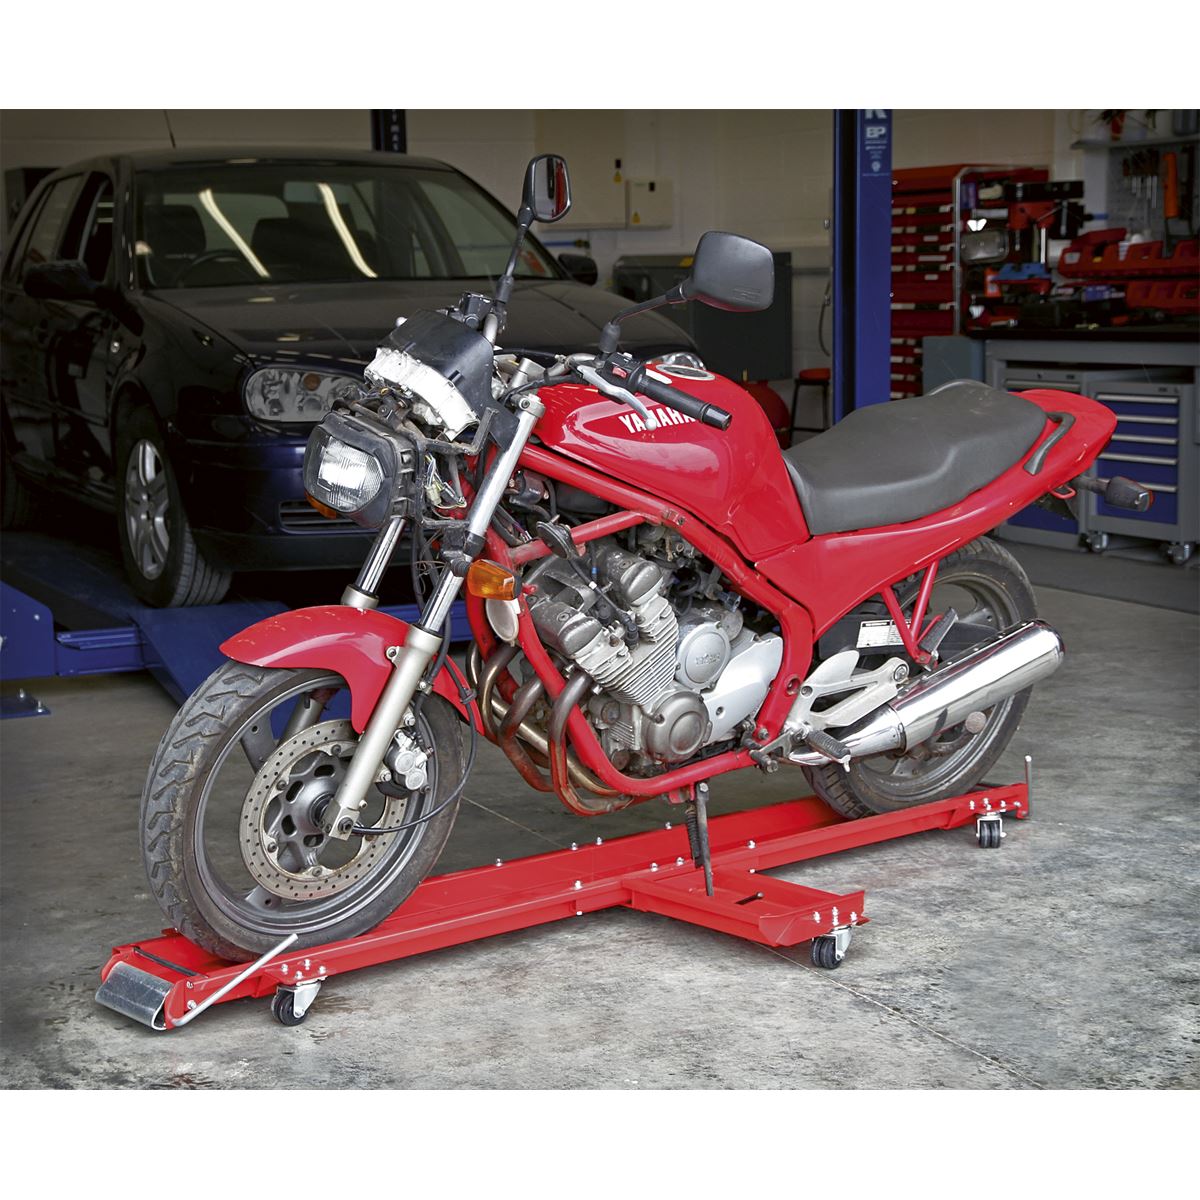 Sealey Motorcycle Dolly - Side Stand Type